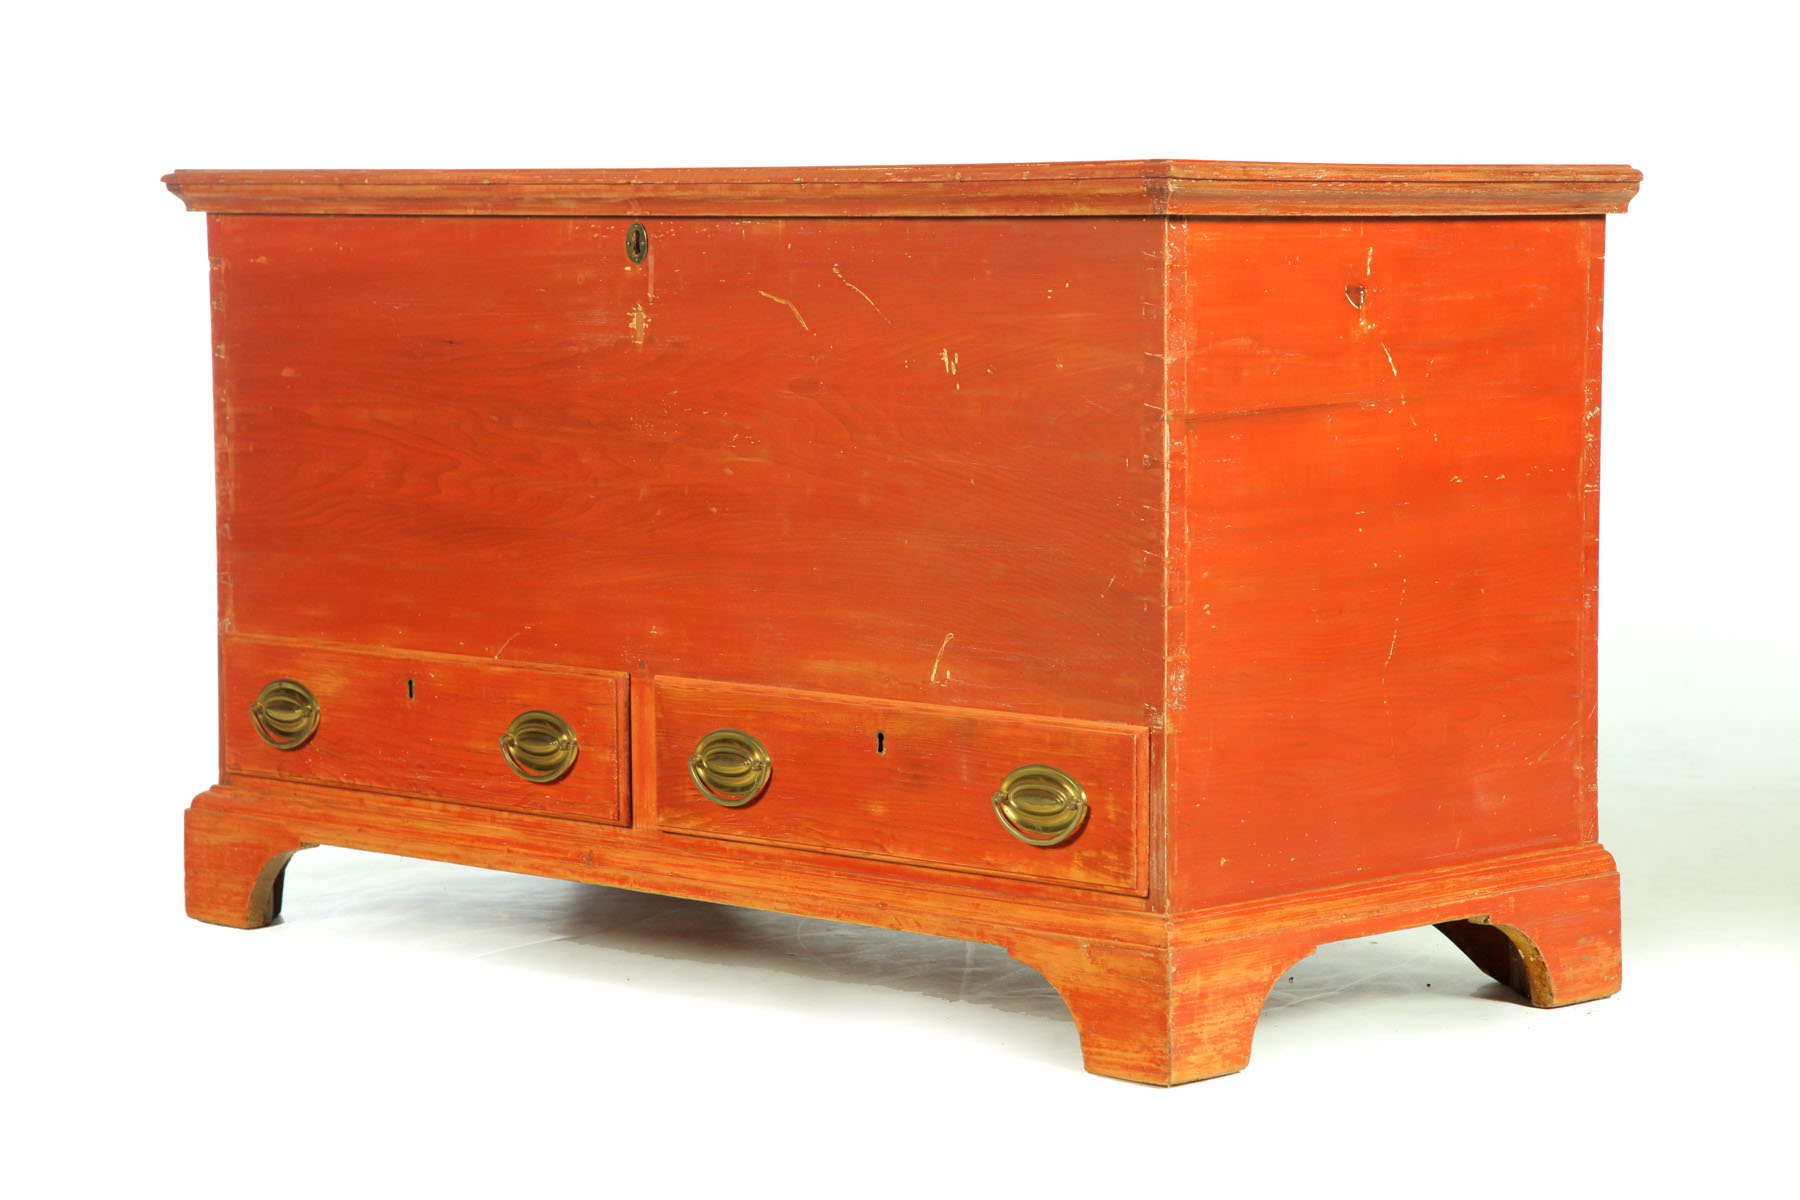 BLANKET CHEST.  American  mid 19th